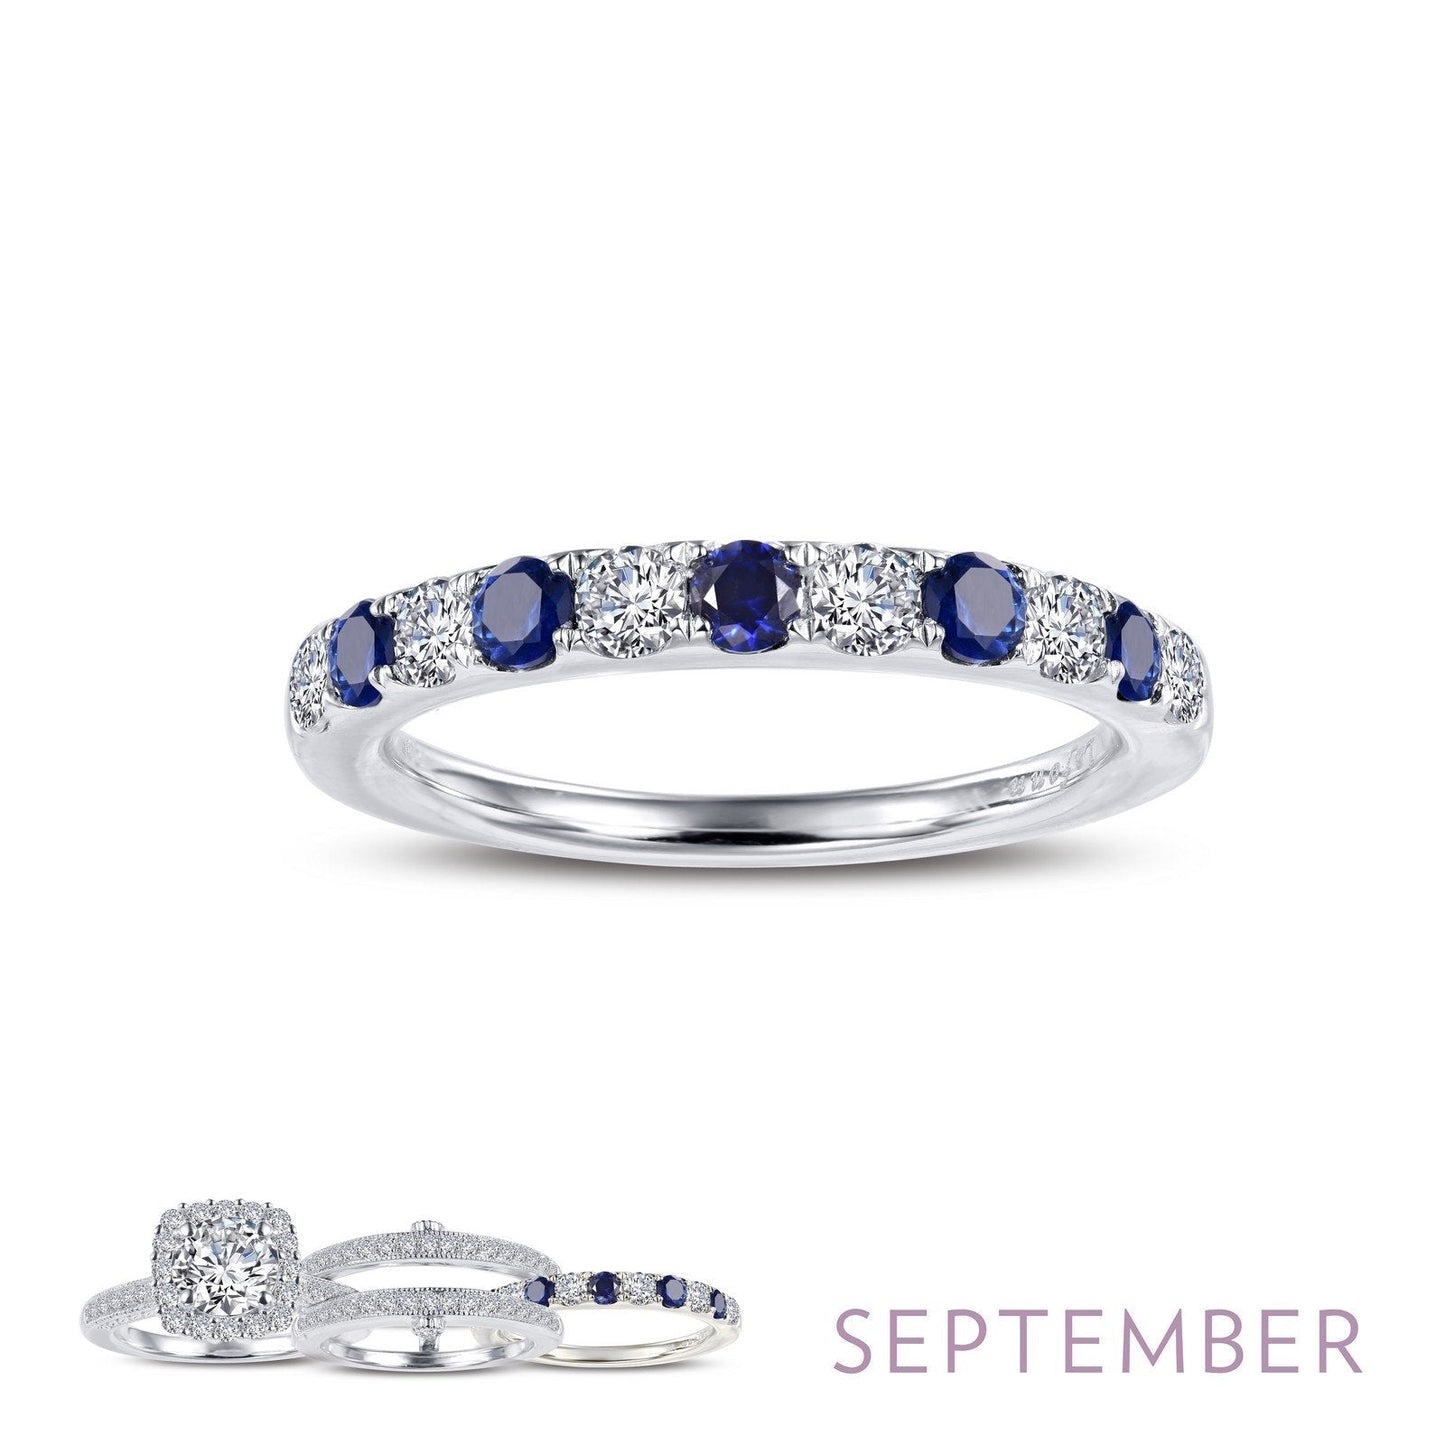 Load image into Gallery viewer, Lafonn September Birthstone Ring SEPTEMBER RINGS Size 6 Platinum 0.51cts CTS Approx.2.7mm(W)
